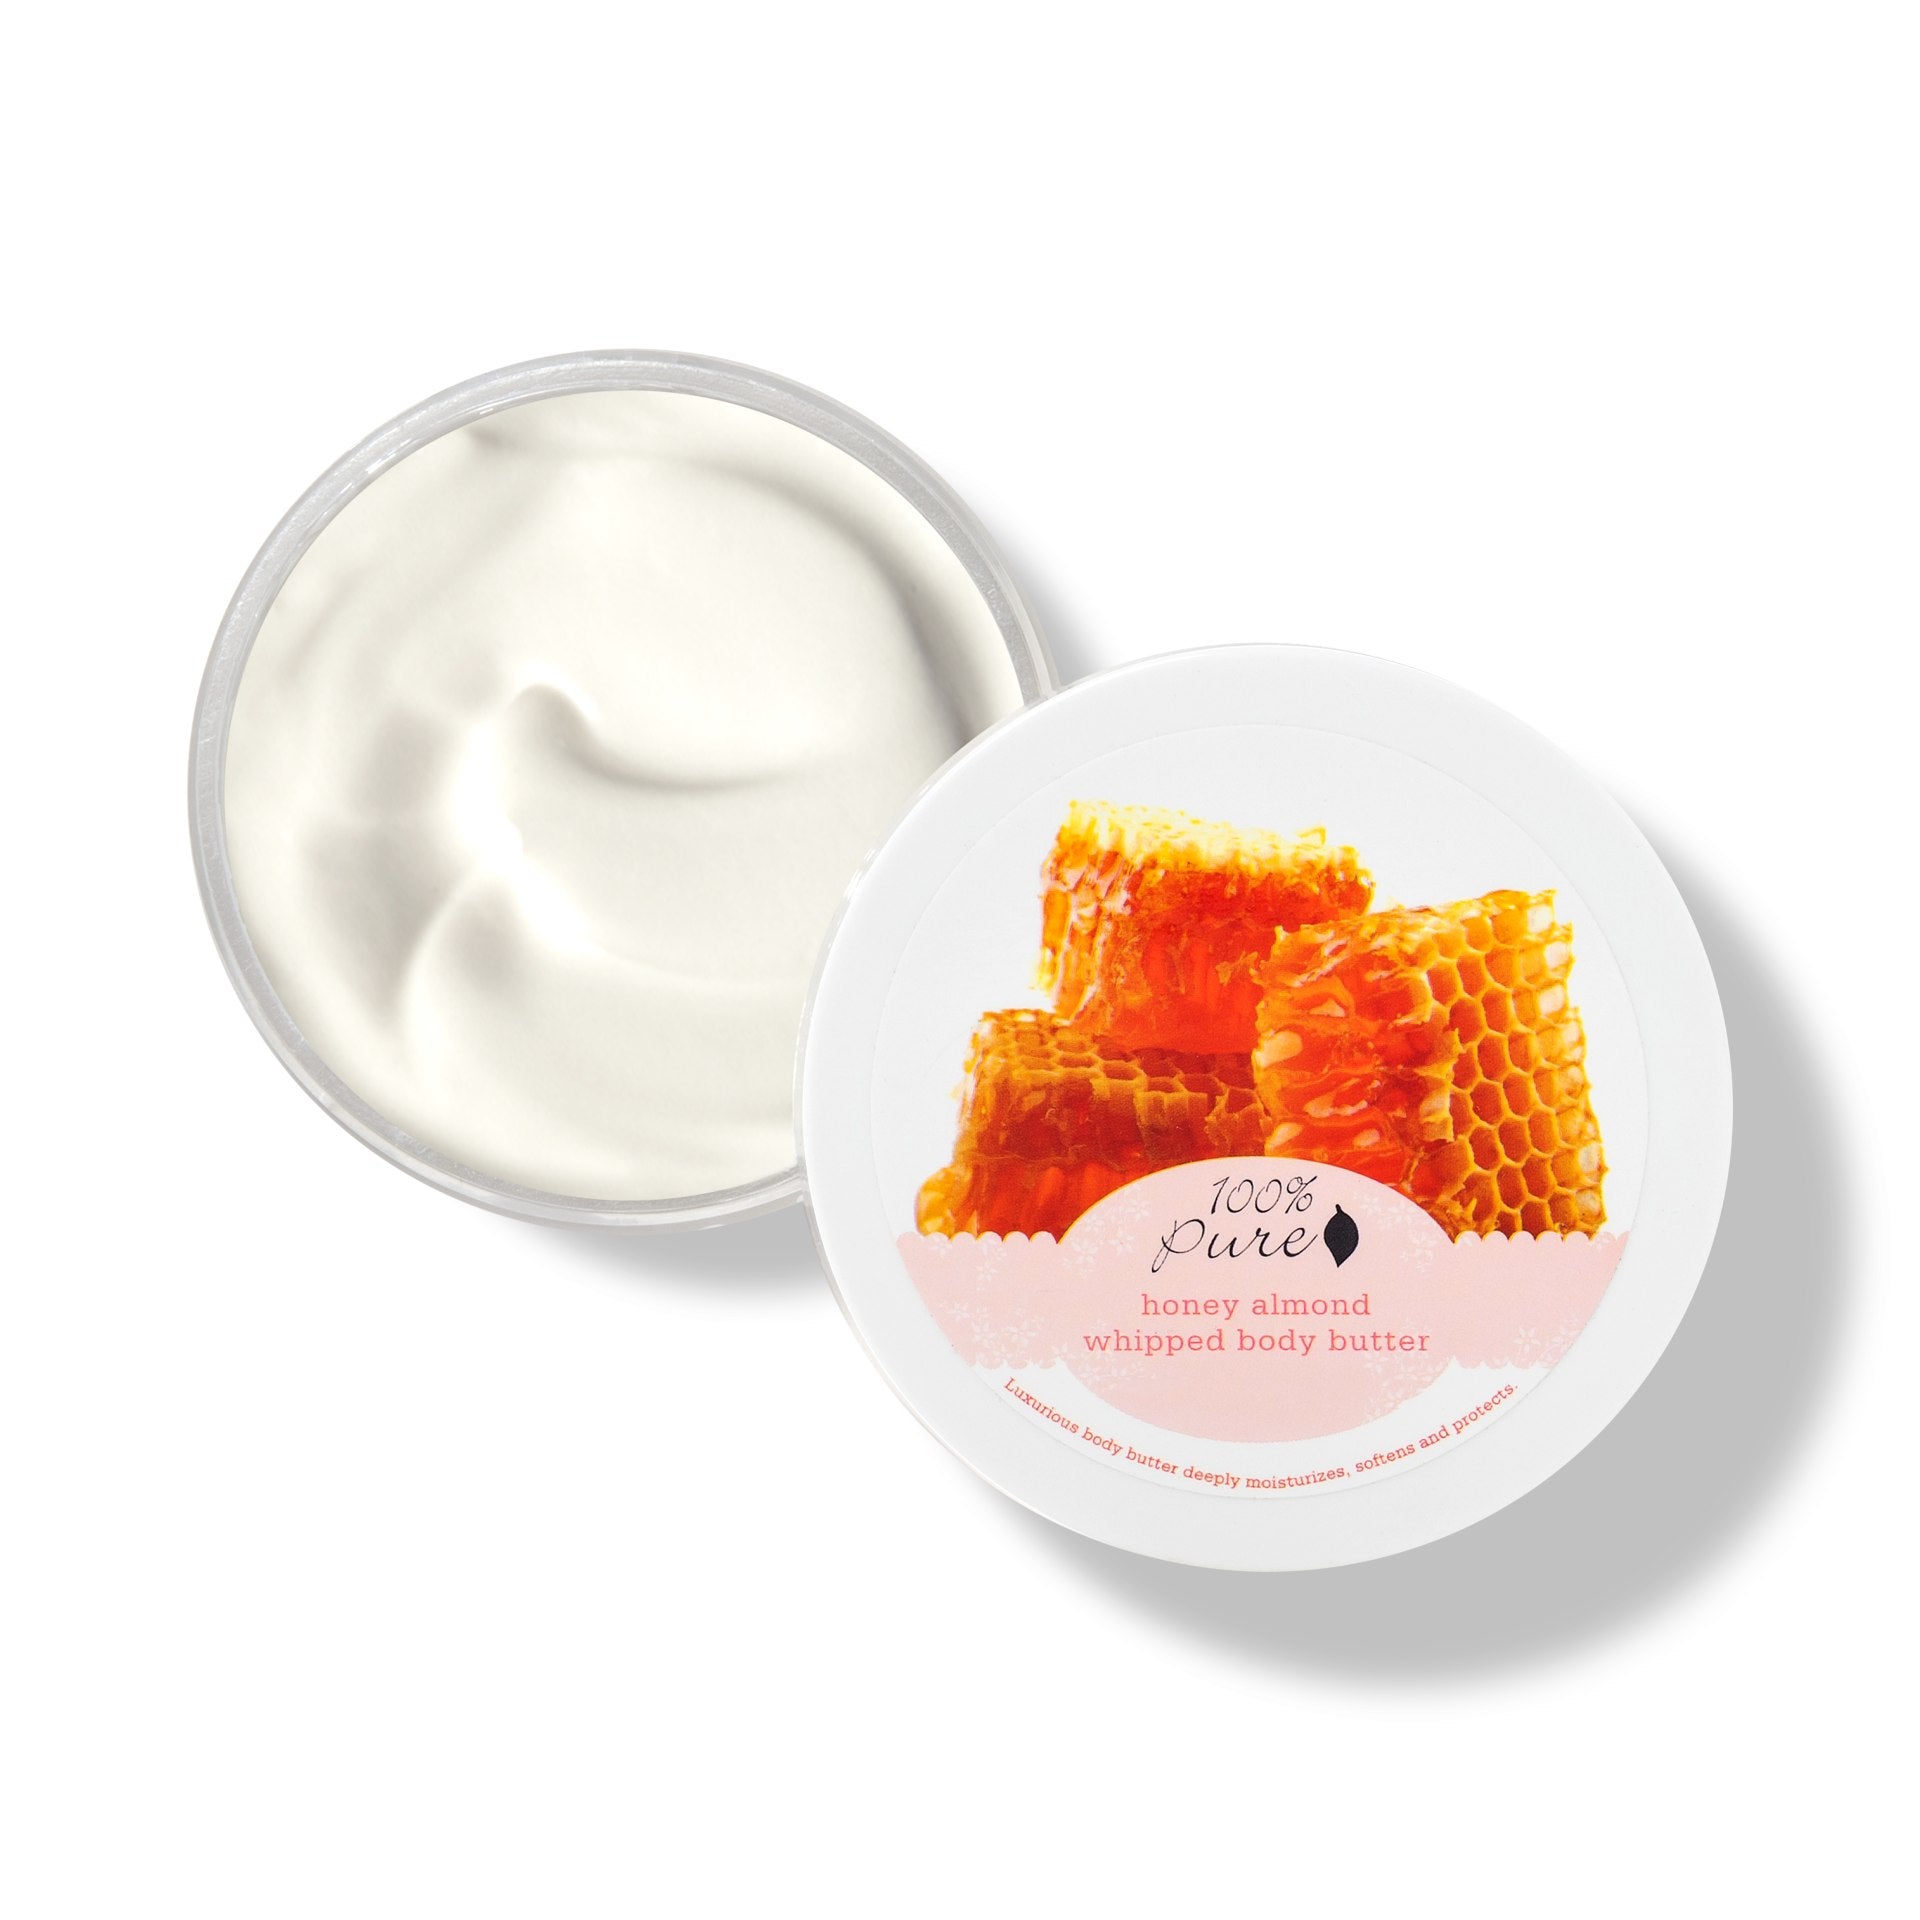 100% PURE Honey Almond Whipped Body Butter